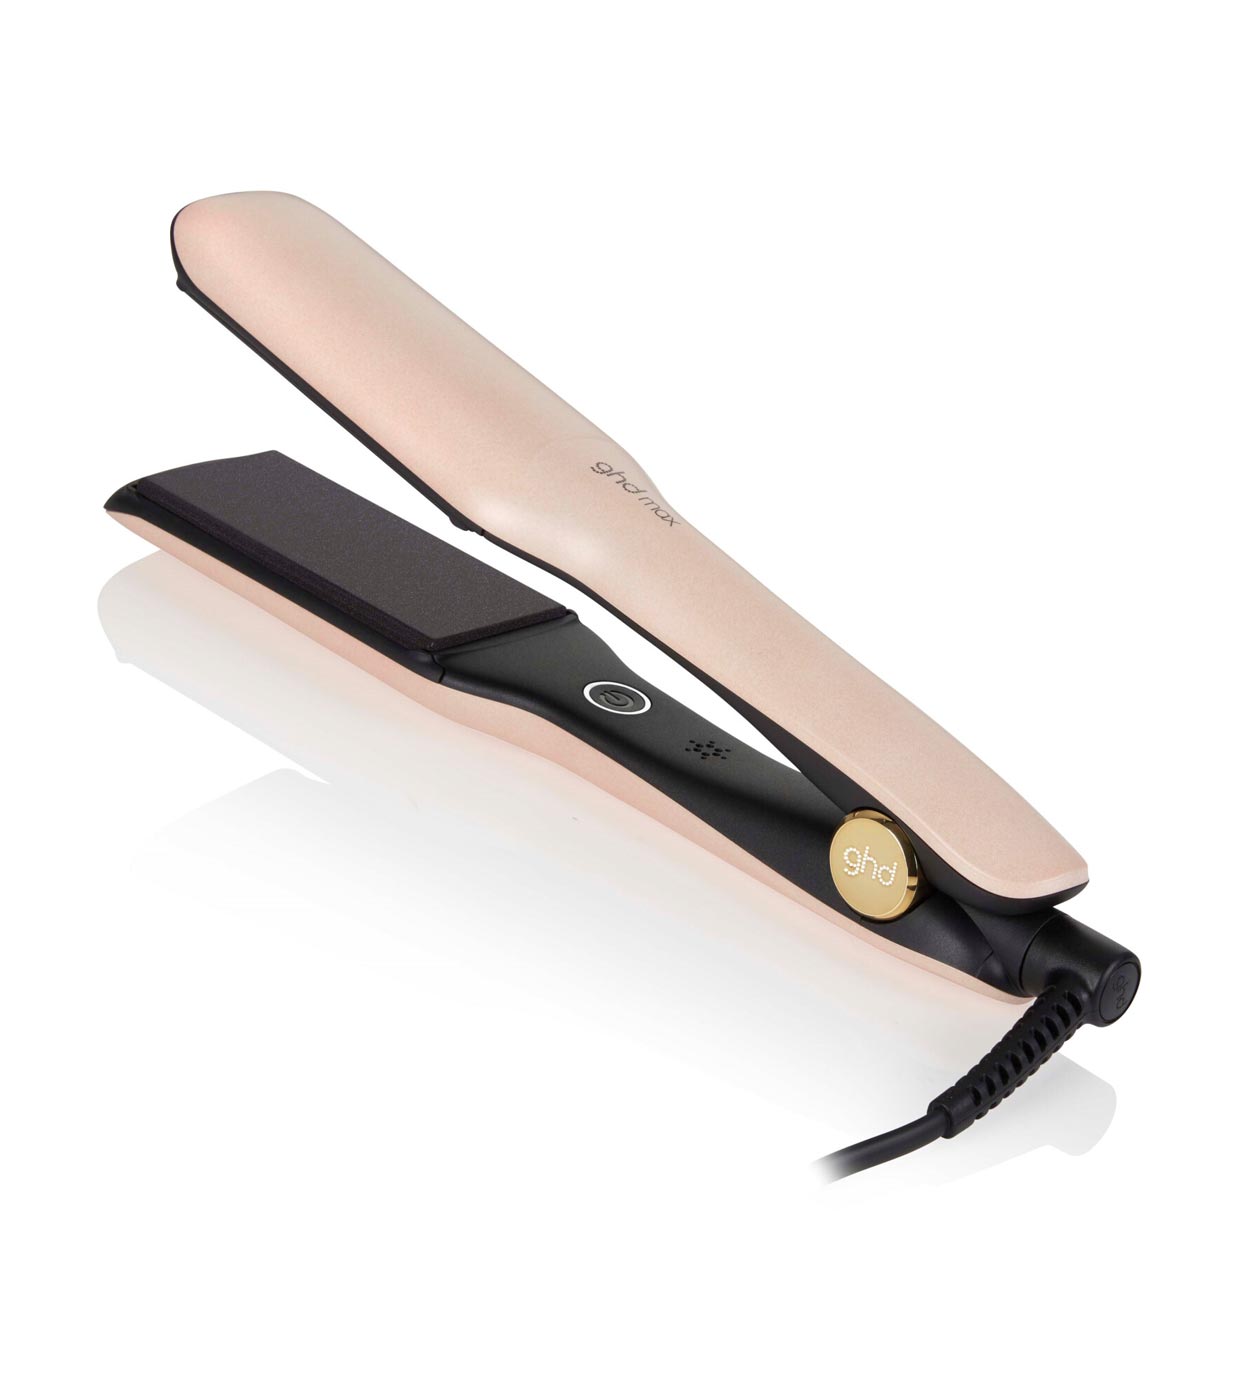 Review Is the ghd Max Wide Plate Styler Really Worth It